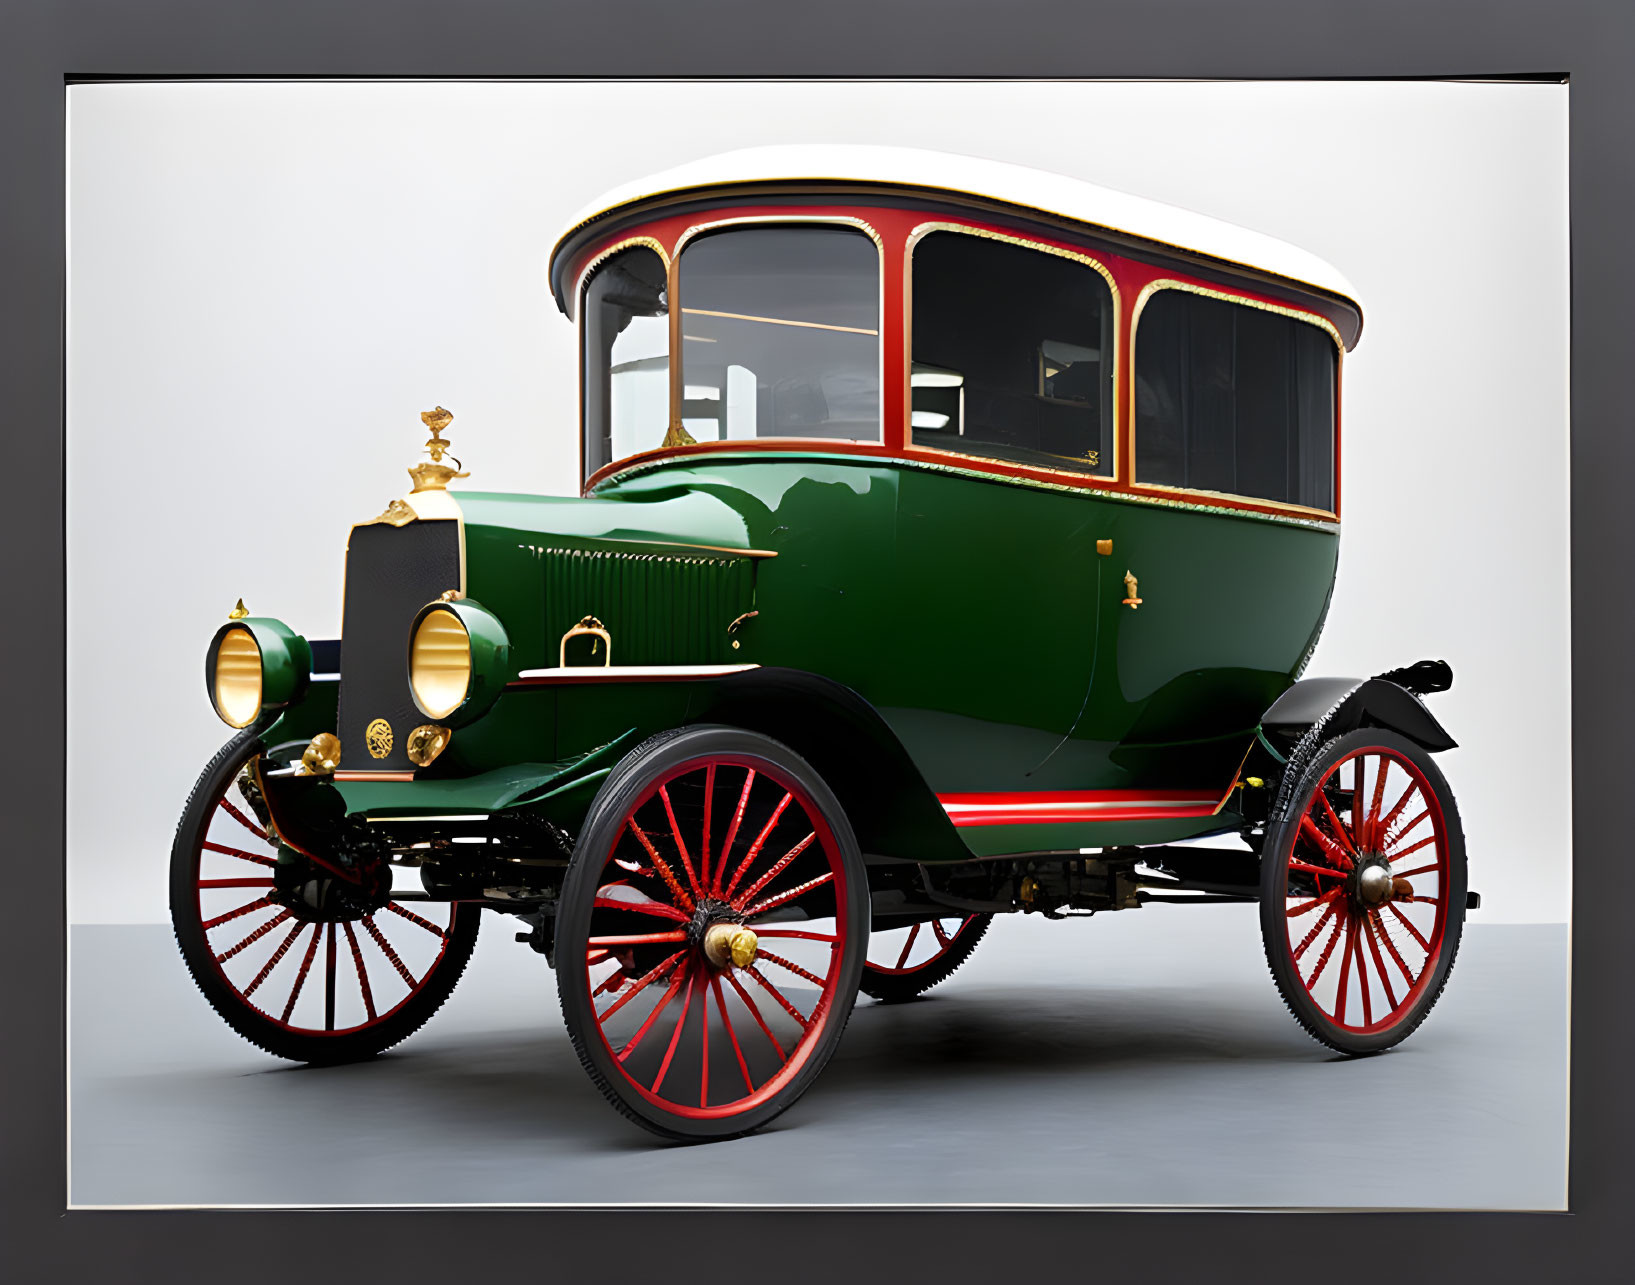 Vintage Green and Black Car with Brass Fittings and Red Wheels